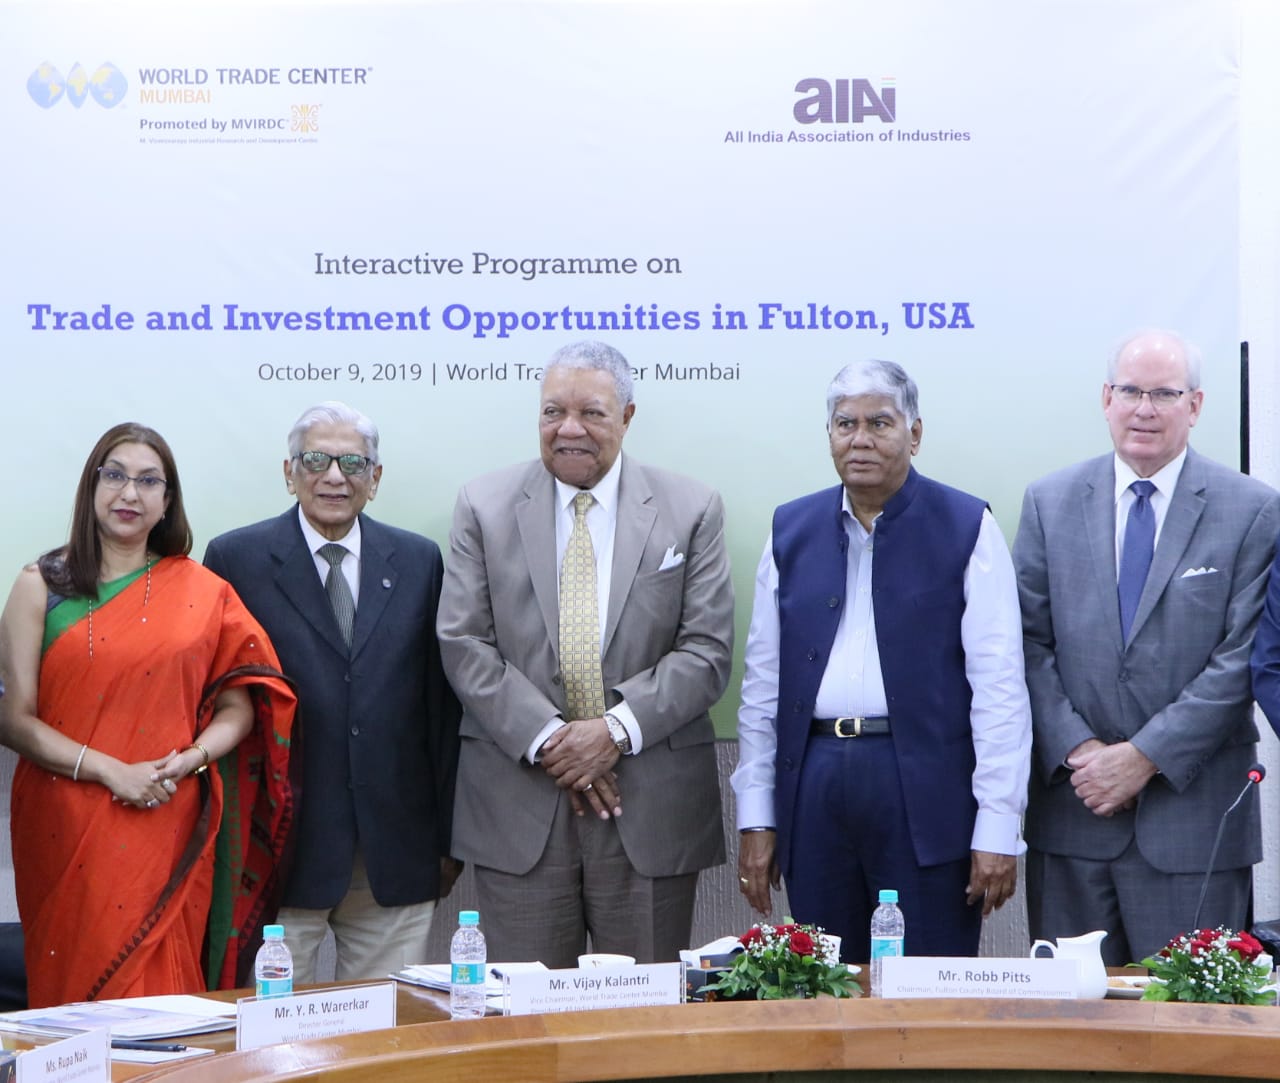 (from left to right) Ms. Rupa Naik, Senior Director, MVIRDC World Trade Center Mumbai, Mr. Y.R. Warerkar, Director General, MVIRDC World Trade Center Mumbai, Mr. Robb Pitts, Chairman, Fulton County Board of Commissioners, Mr. Vijay Kalantri, Vice Chairman, MVIRDC World Trade Center Mumbai and President, All India Association of Industries (AIAI) and Mr. Al Nash, Executive Director, The North Fulton Community Improvement District at an interactive programme on ‘Trade and Investment Opportunities in Fulton, USA’ -Photo By Sachin Murdeshwar GPN